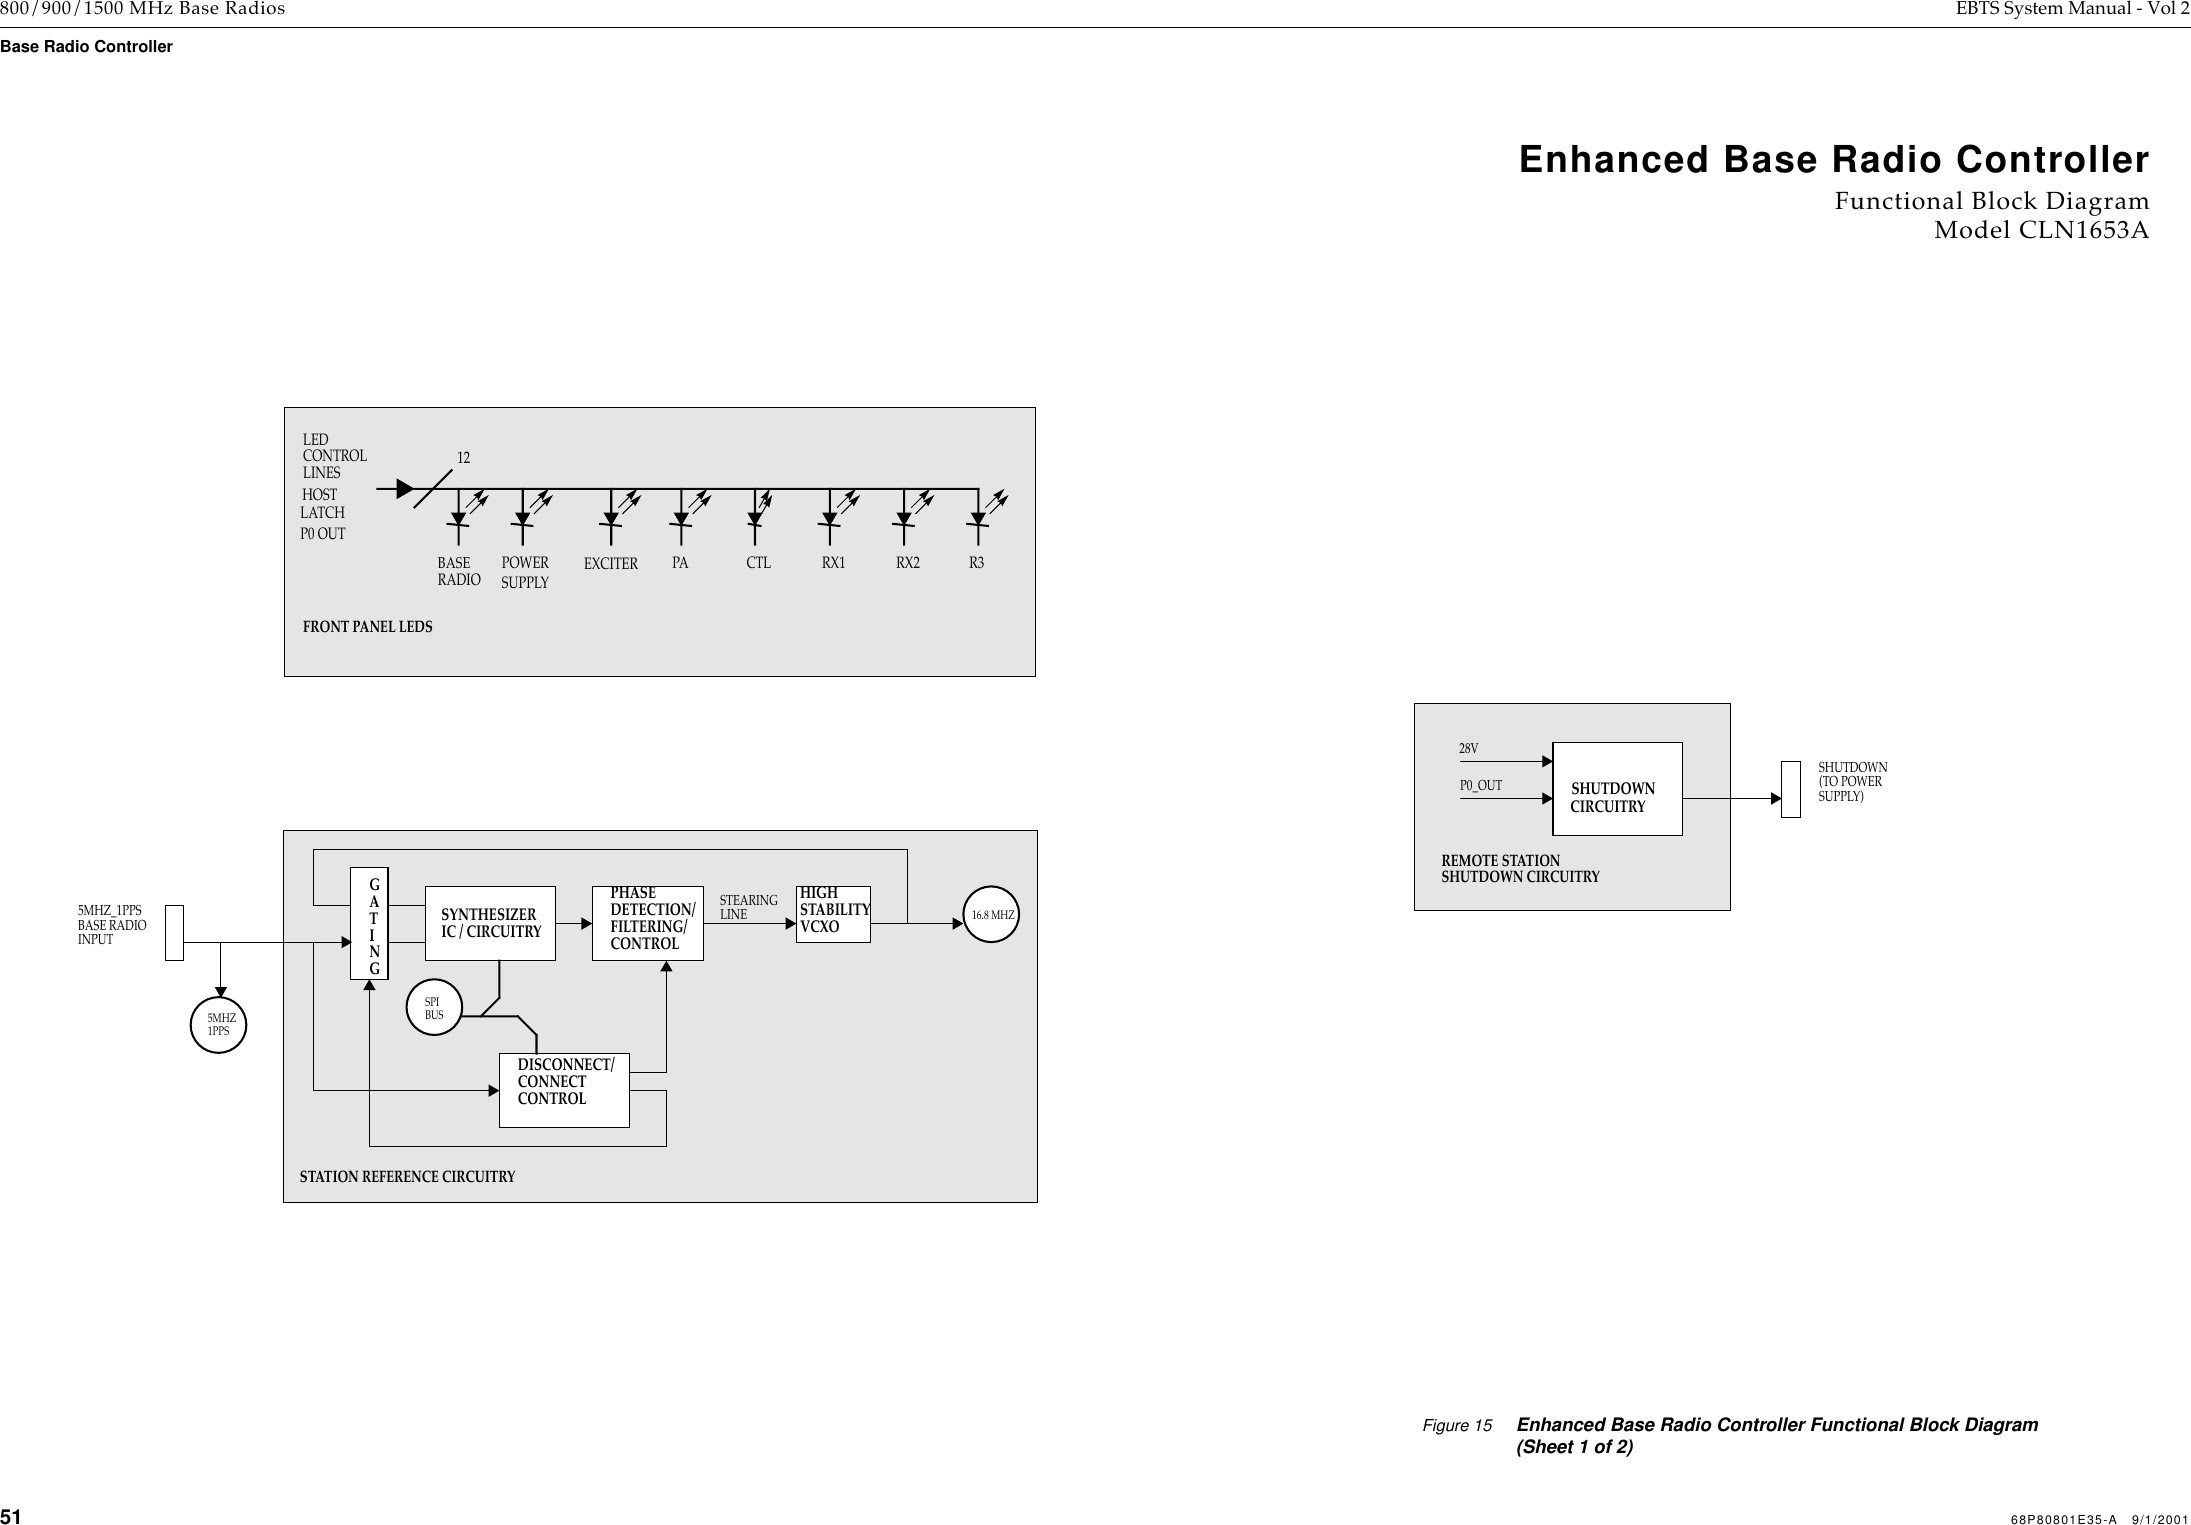 51 68P80801E35-A   9/1/2001 800/900/1500 MHz Base Radios EBTS System Manual - Vol 2Base Radio Controller  Figure 15 Enhanced Base Radio Controller Functional Block Diagram (Sheet 1 of 2)Enhanced Base Radio ControllerFunctional Block DiagramModel CLN1653ABASERADIO POWER EXCITER PA CTL RX1 RX2 R3P0 OUTLEDCONTROLLINESHOSTLATCH12FRONT PANEL LEDSREMOTE STATION28VP0_OUTSHUTDOWNCIRCUITRYSHUTDOWN(TO POWERSUPPLY)SHUTDOWN CIRCUITRYSYNTHESIZERIC / CIRCUITRY5MHZ_1PPSBASE RADIOINPUTHIGHSTABILITYVCXOPHASEDETECTION/FILTERING/CONTROLSTEARINGLINEDISCONNECT/CONNECTCONTROLGATINGSPIBUS16.8 MHZSTATION REFERENCE CIRCUITRY5MHZ1PPSSUPPLY